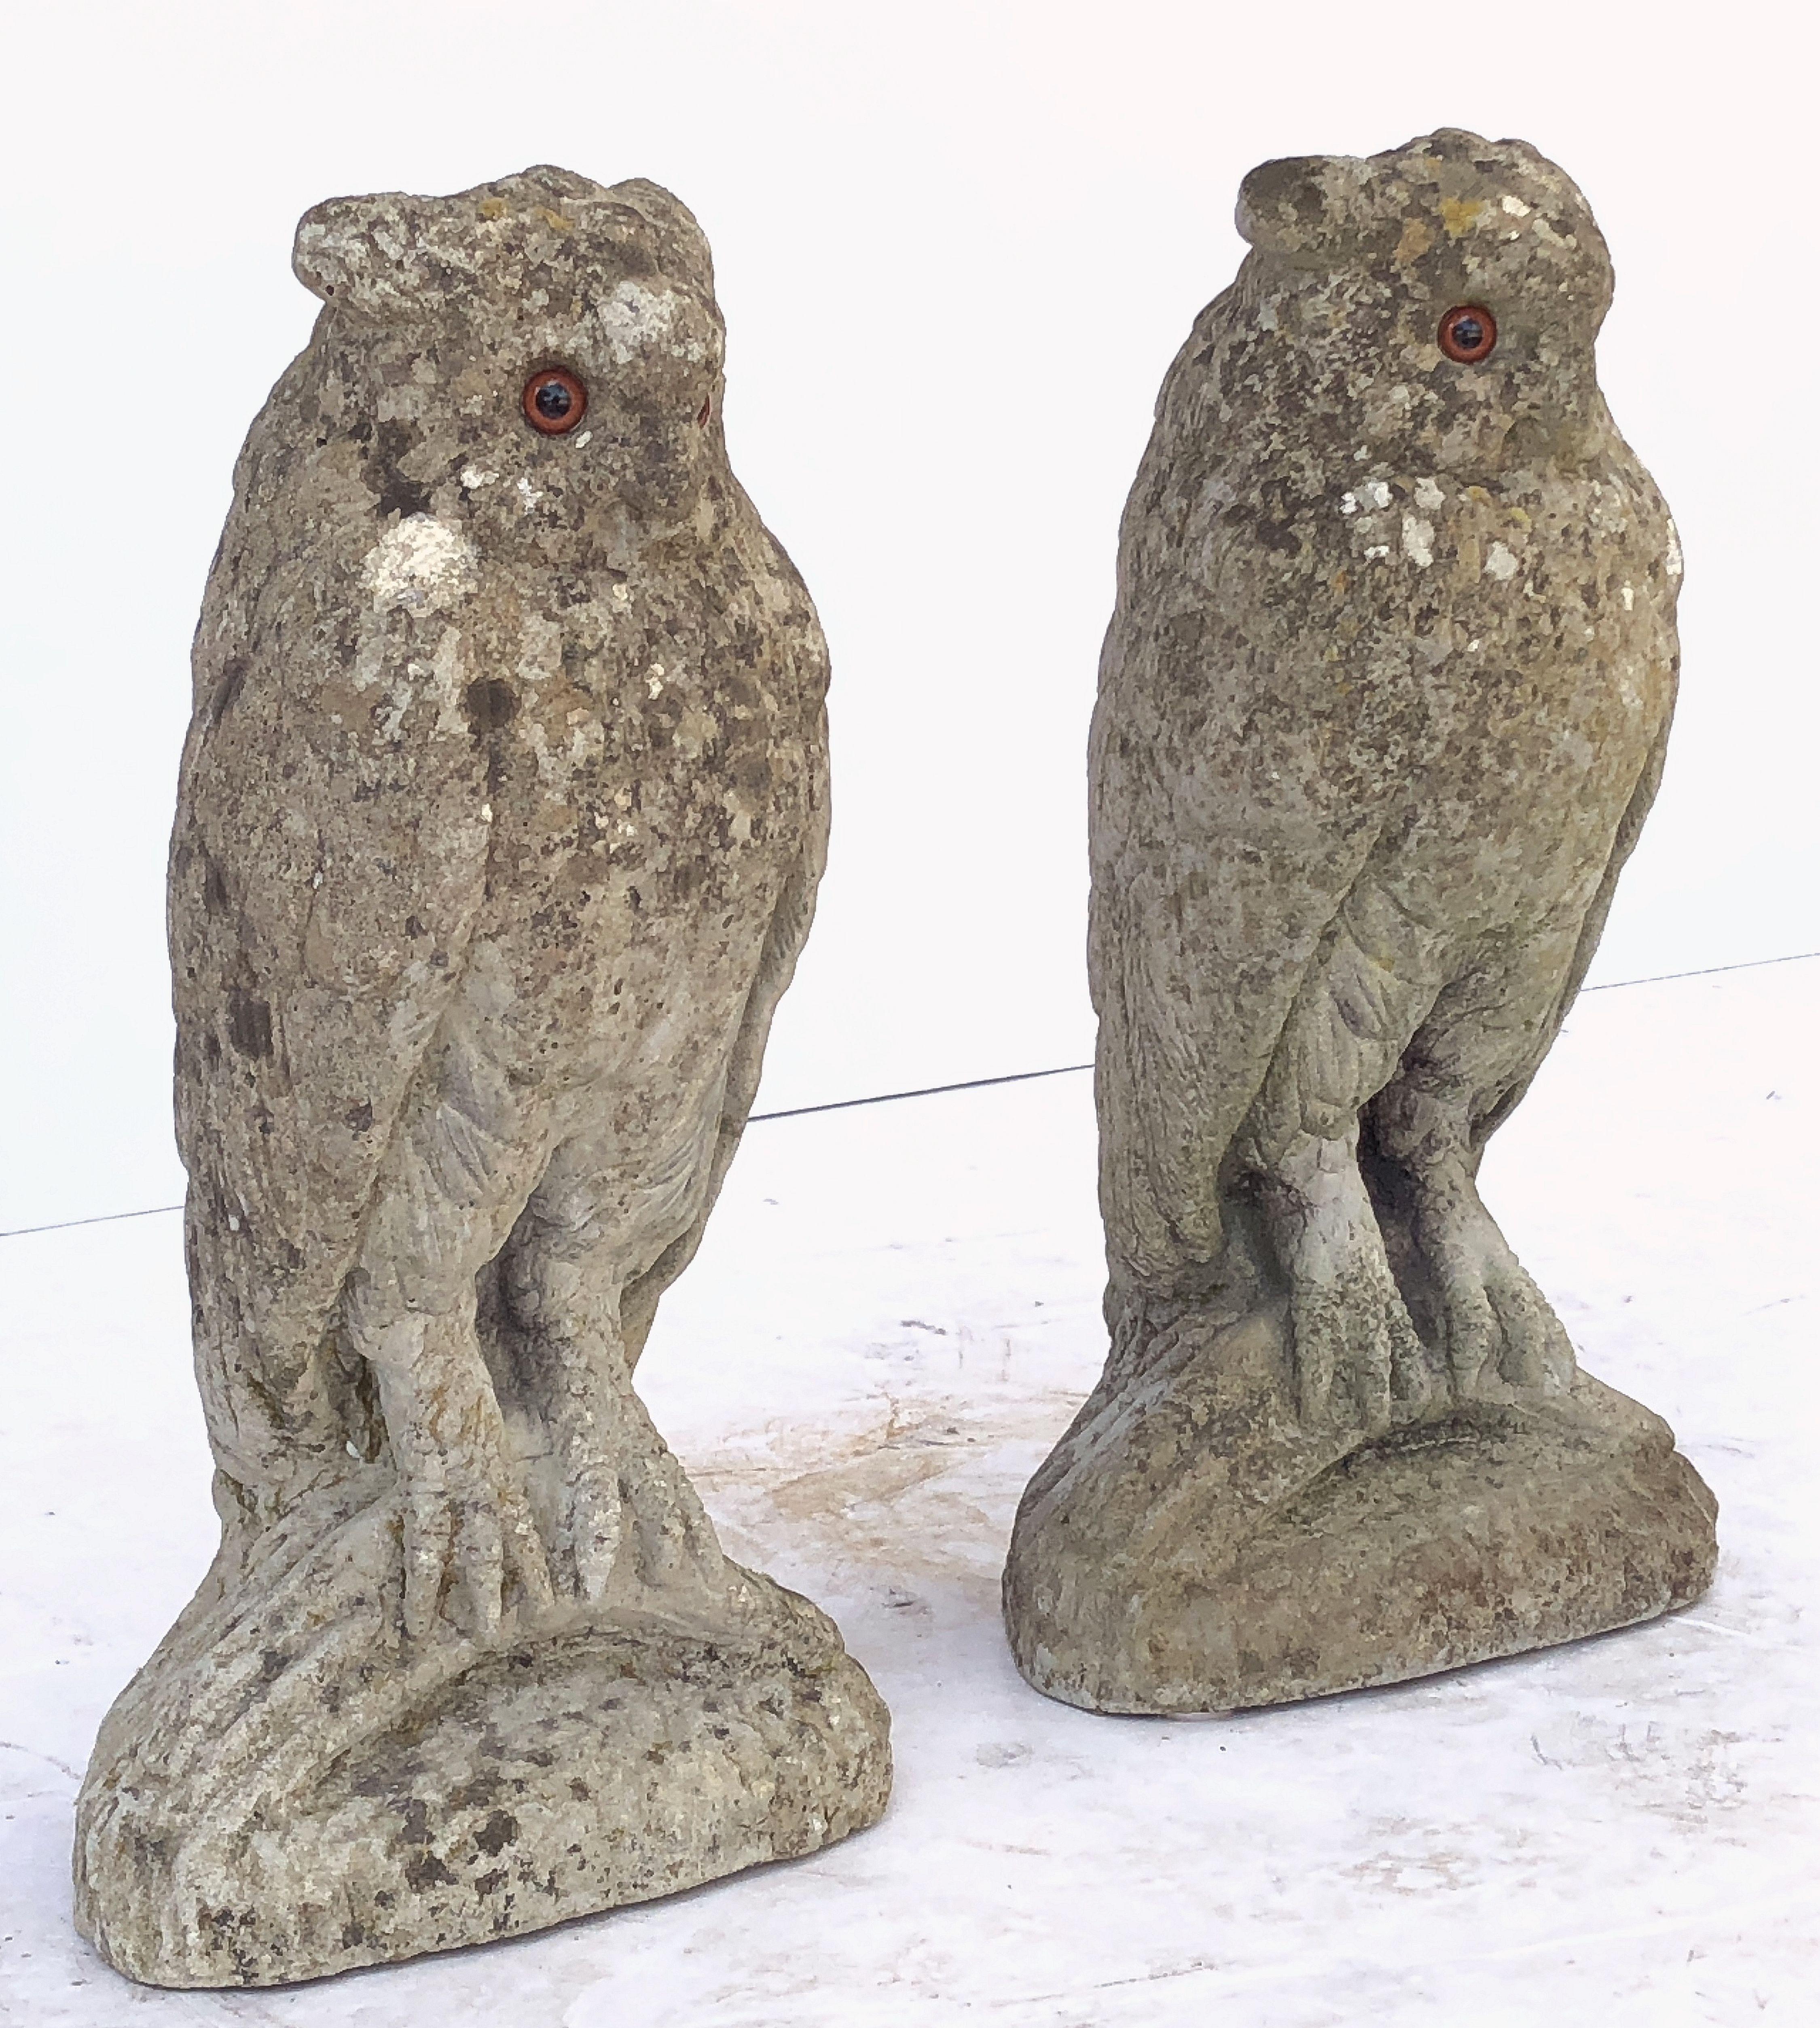 A pair of large English owl statues of composition stone, each owl featuring a standing in-the-round pose.

Individually priced - $1995 each owl.